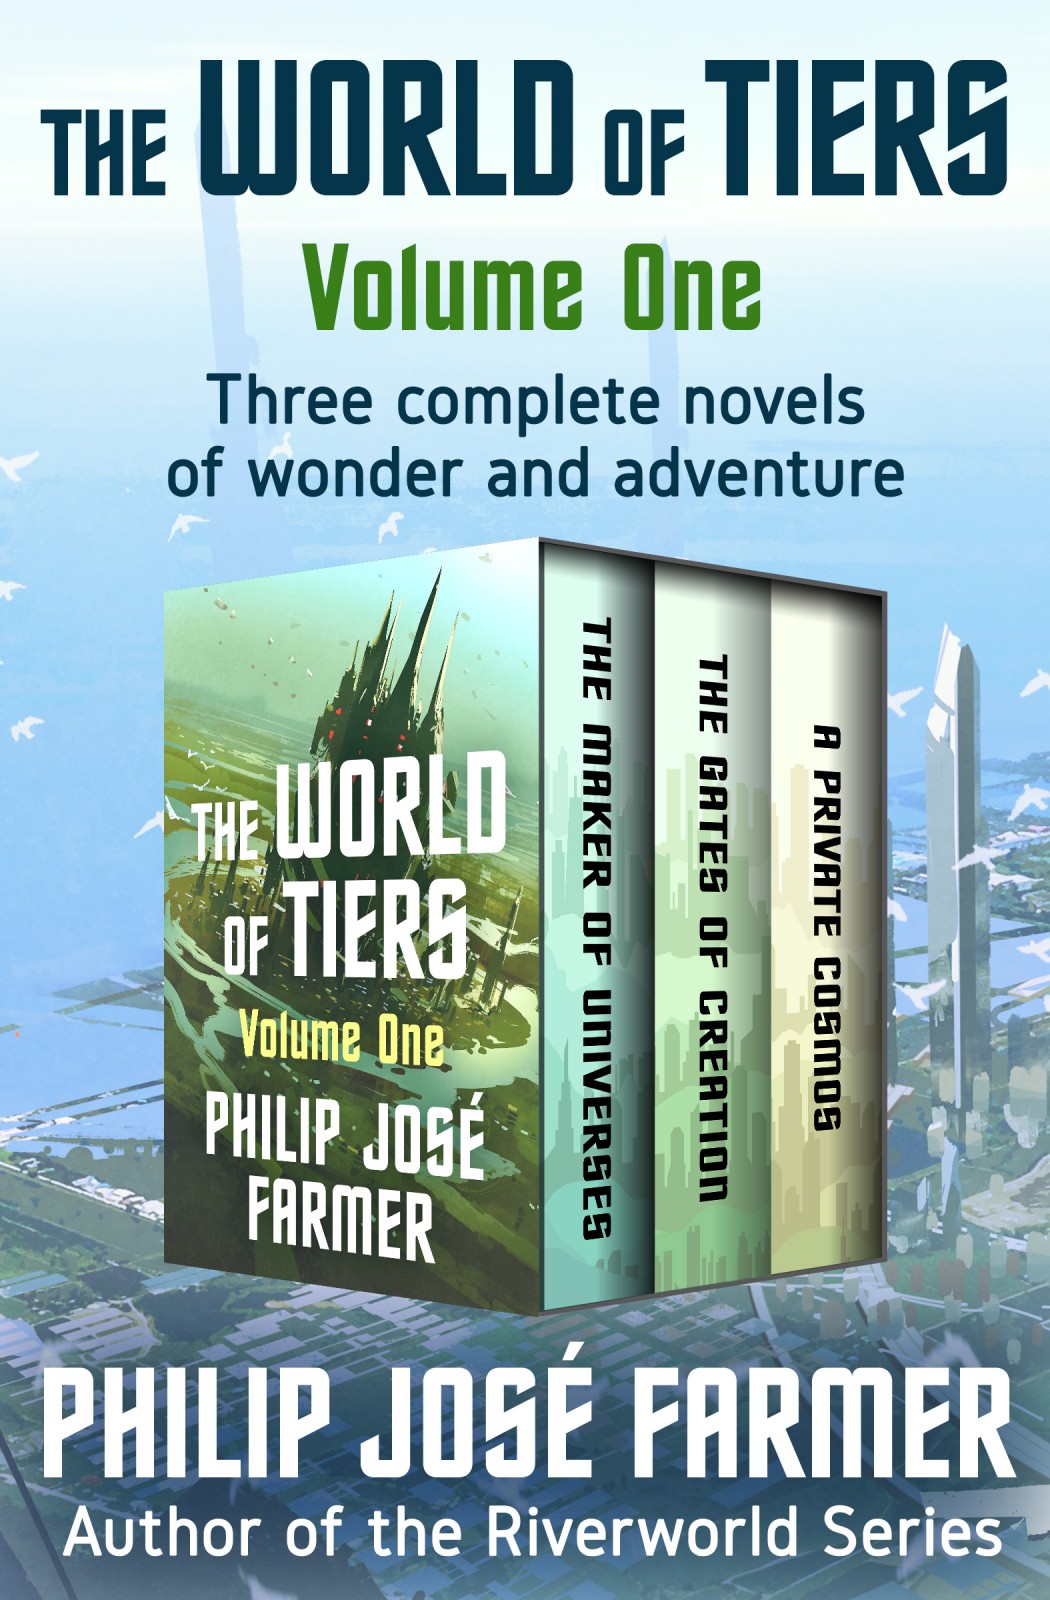 The World of Tiers, Volumes One and Two